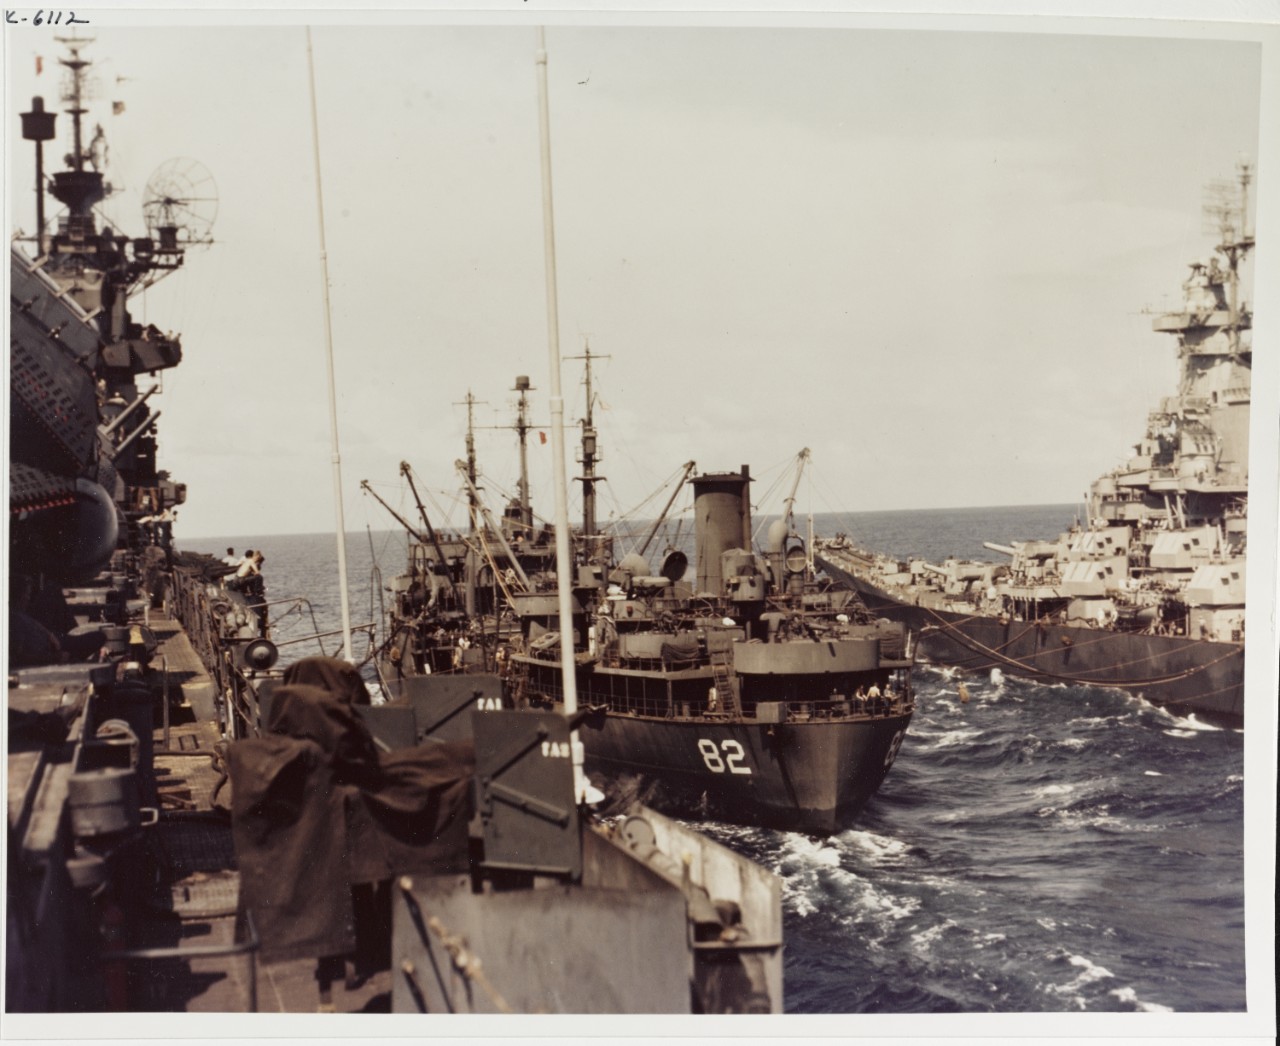 USS CAHABA (AO-82) refuels USS IOWA (BB-61) and an aircraft carrier (either TICONDEROGA, RANDOLPH, or SHANGRI-LA) in the Pacific, 1945